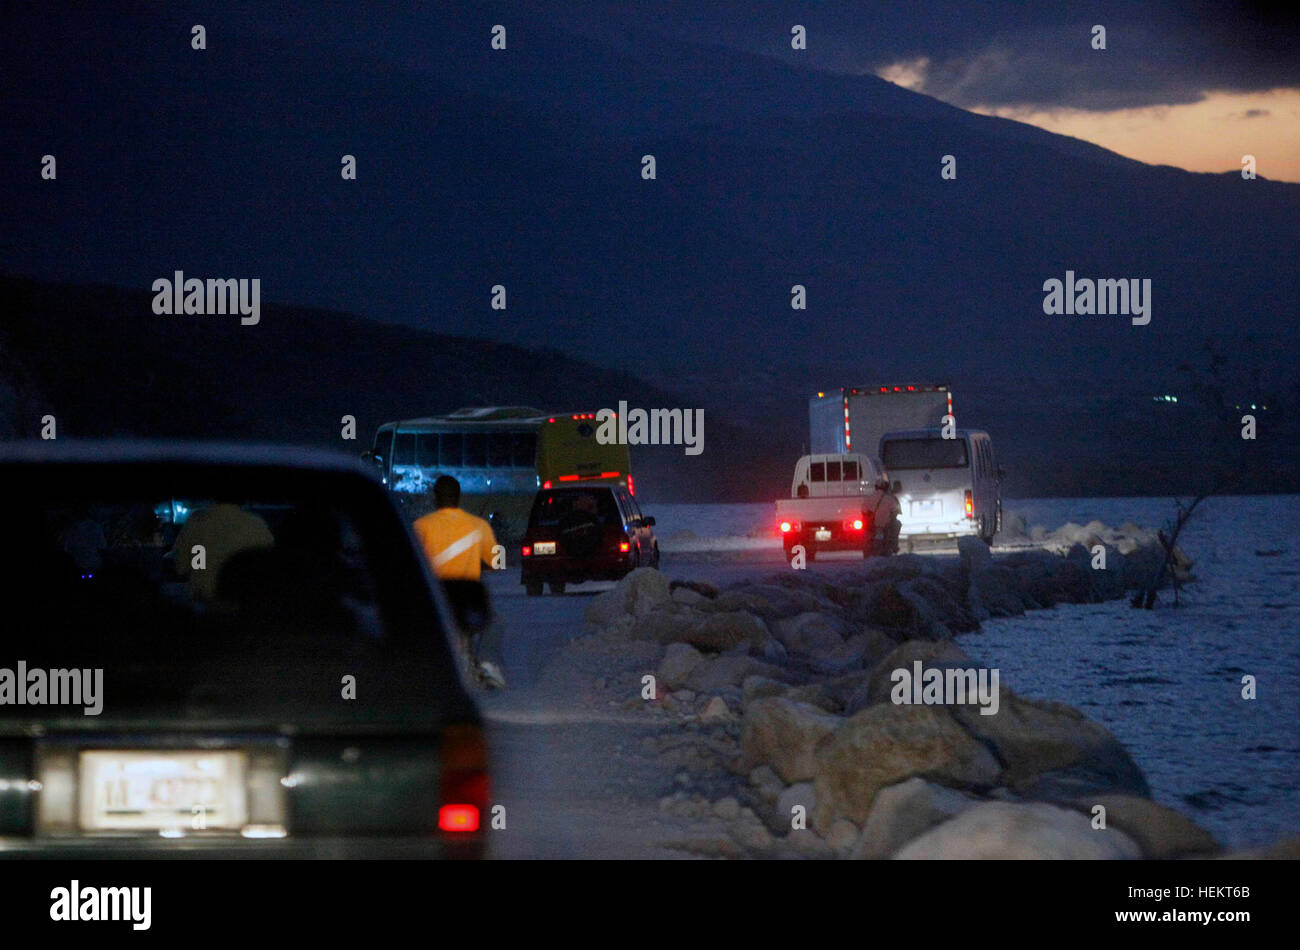 Florida, USA. 23rd Dec, 2016. 011510 (Lannis Waters/The Palm Beach Post) HAITI - Vehicles head toward Port-au-Prince from the border with the Dominican Republic Friday evening. With access to the Port-au-Prince International Airport severely constrained, the overland route from Santo Domingo is one of the few ways in to Port-au-Prince. © Lannis Waters/The Palm Beach Post/ZUMA Wire/Alamy Live News Stock Photo